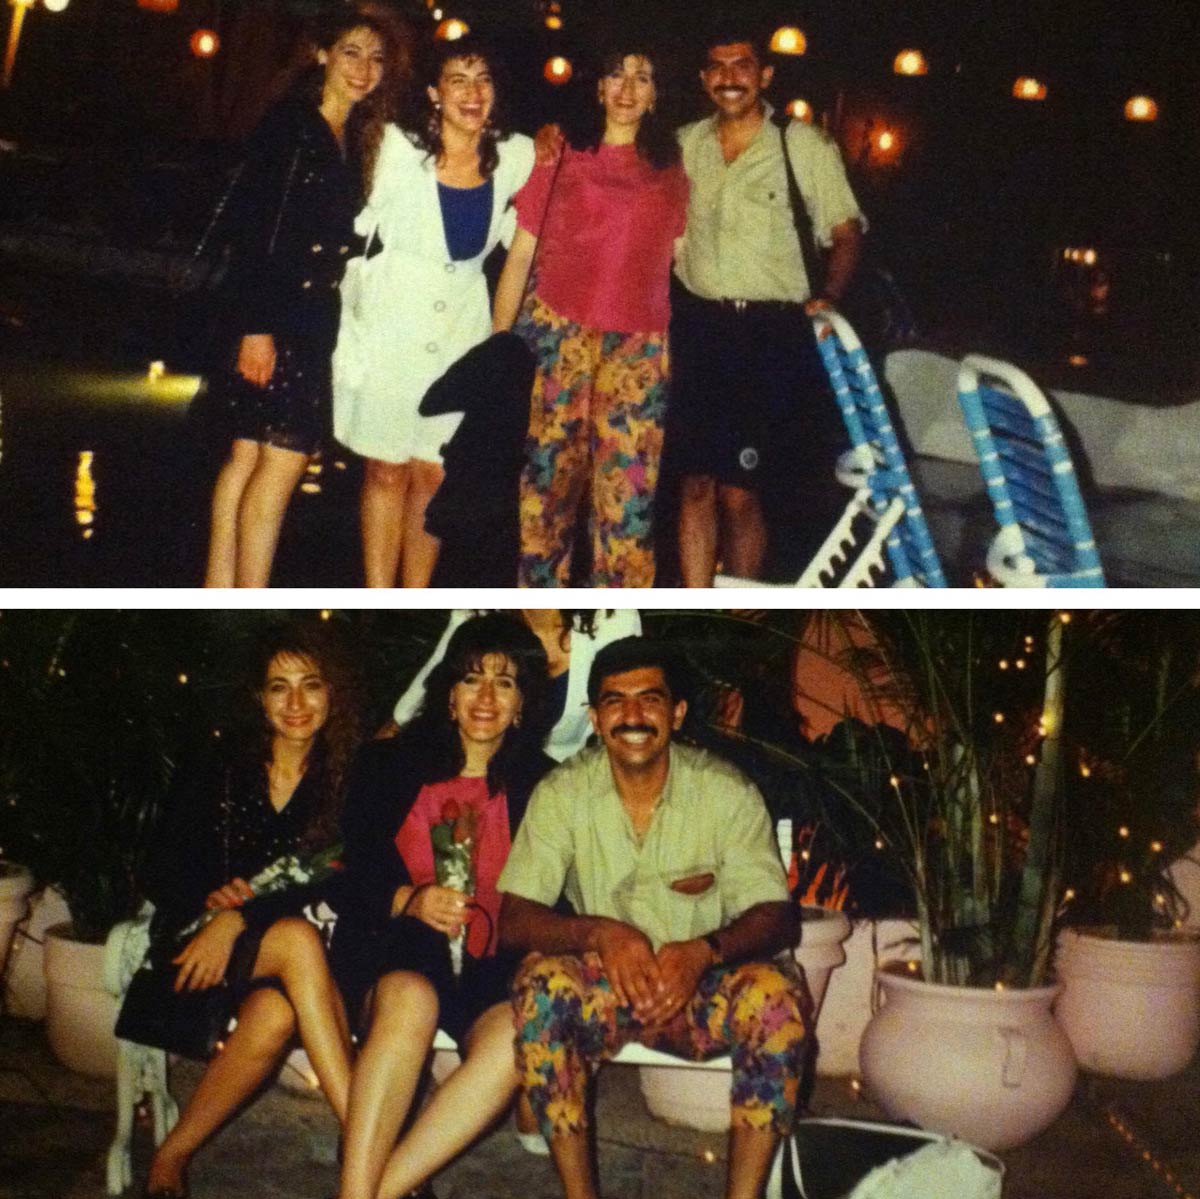 1988: My dad was denied entry to a club in Mexico because he was wearing shorts so my mom gave him her pants